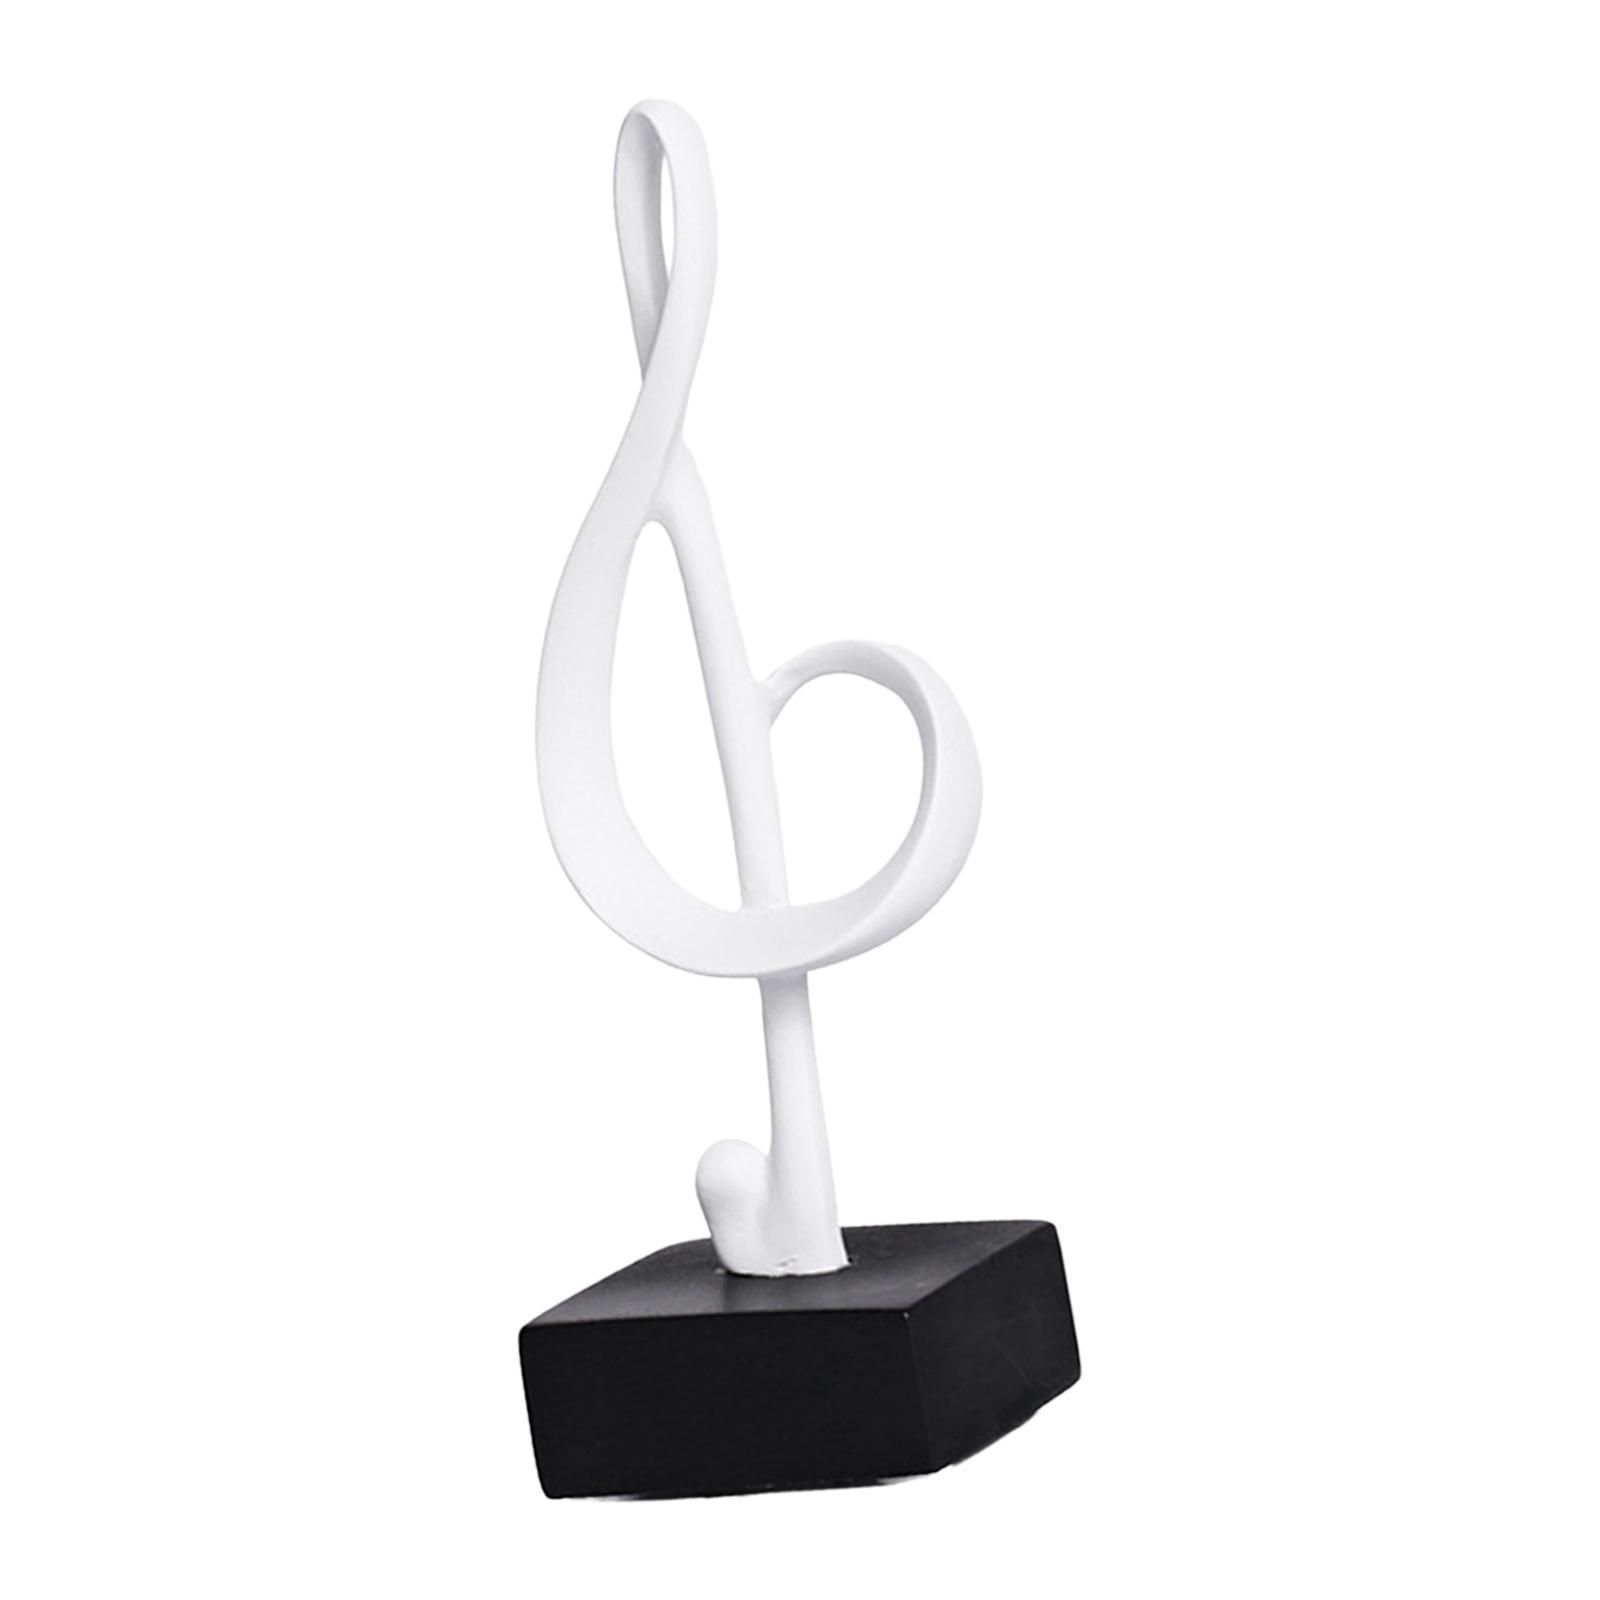 Creative Music Note Figurine Resin Statue Sculpture Artwork for Living Room office and home Decoration